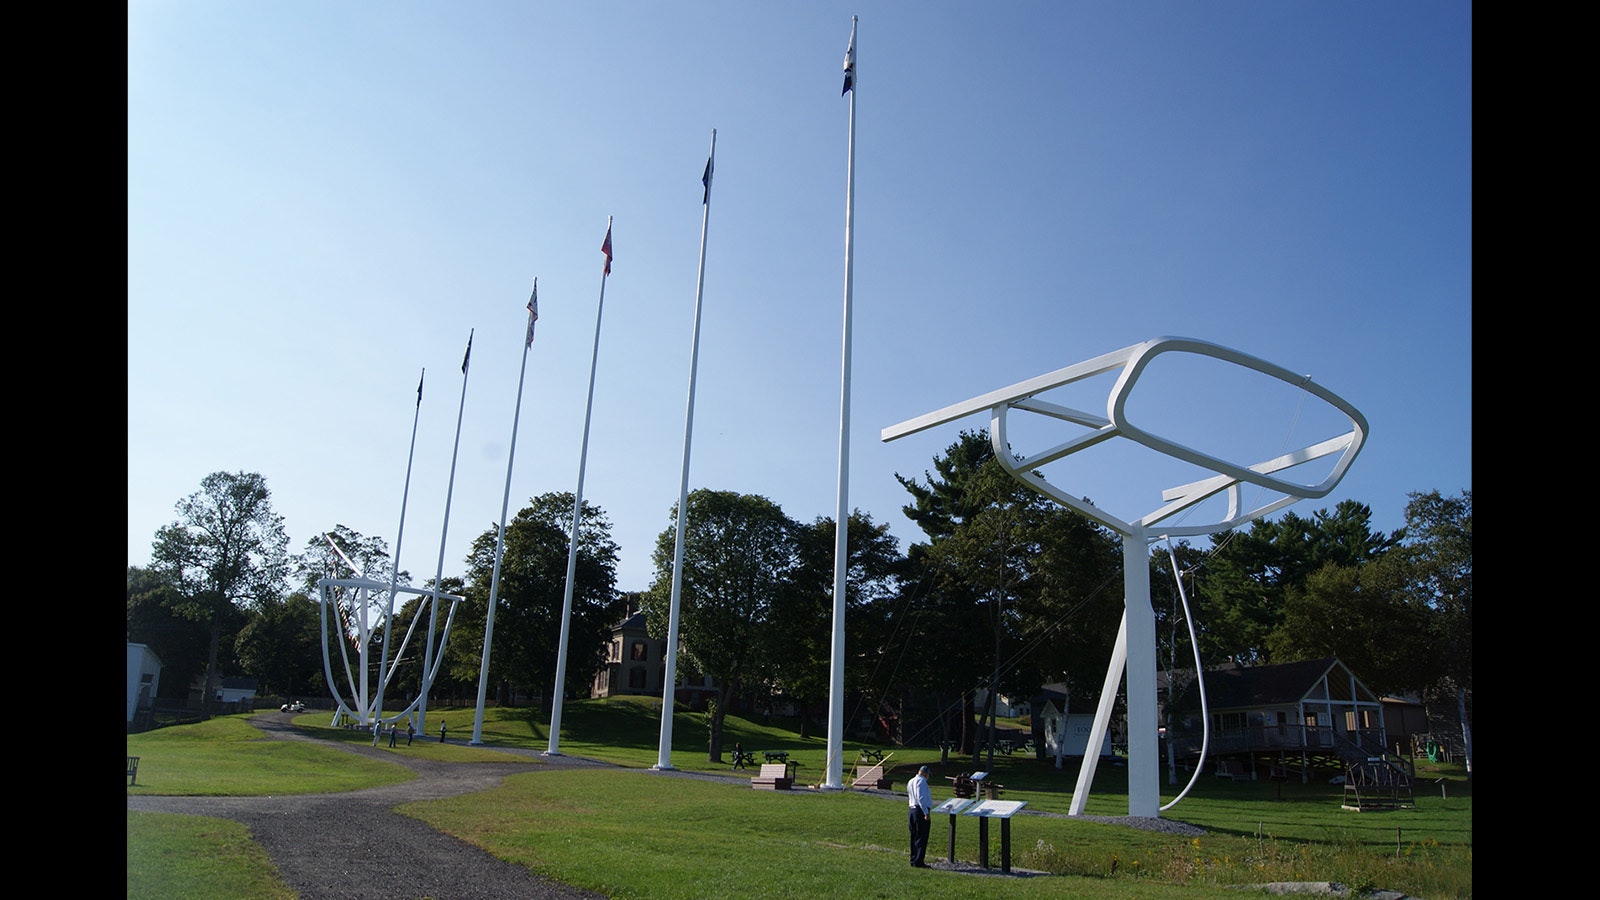 This life-sized sculpture of the Wyoming stands outside the Maine Maritime Museum in Bath, Maine.